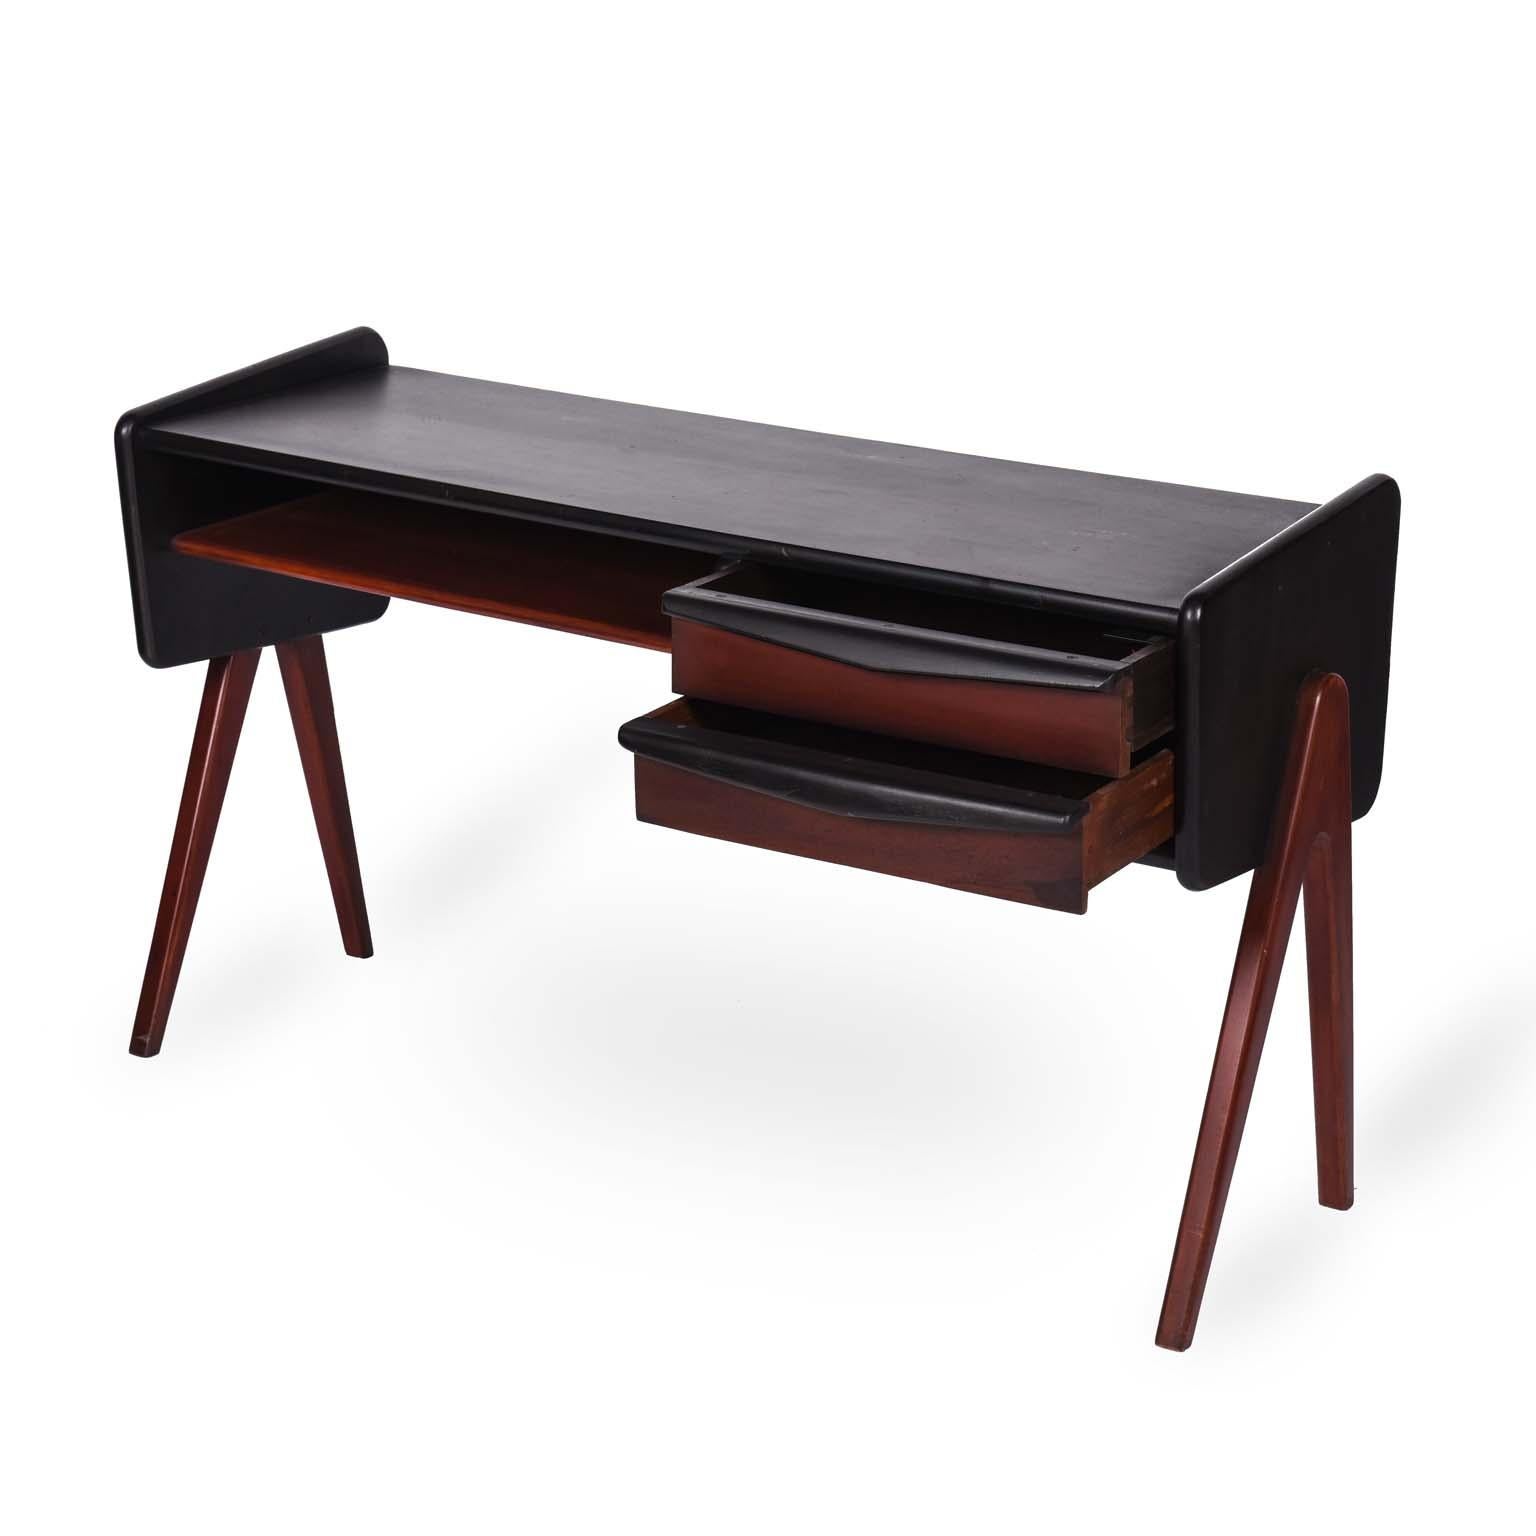 Móveis Cimo midcentury Brazilian desk table, 1960s.

Constructed of lacquered wood in two colors, this beautiful desk has ample workspace and two drawers for storage.
It still preserves the original manufacture stamp at the bottom.